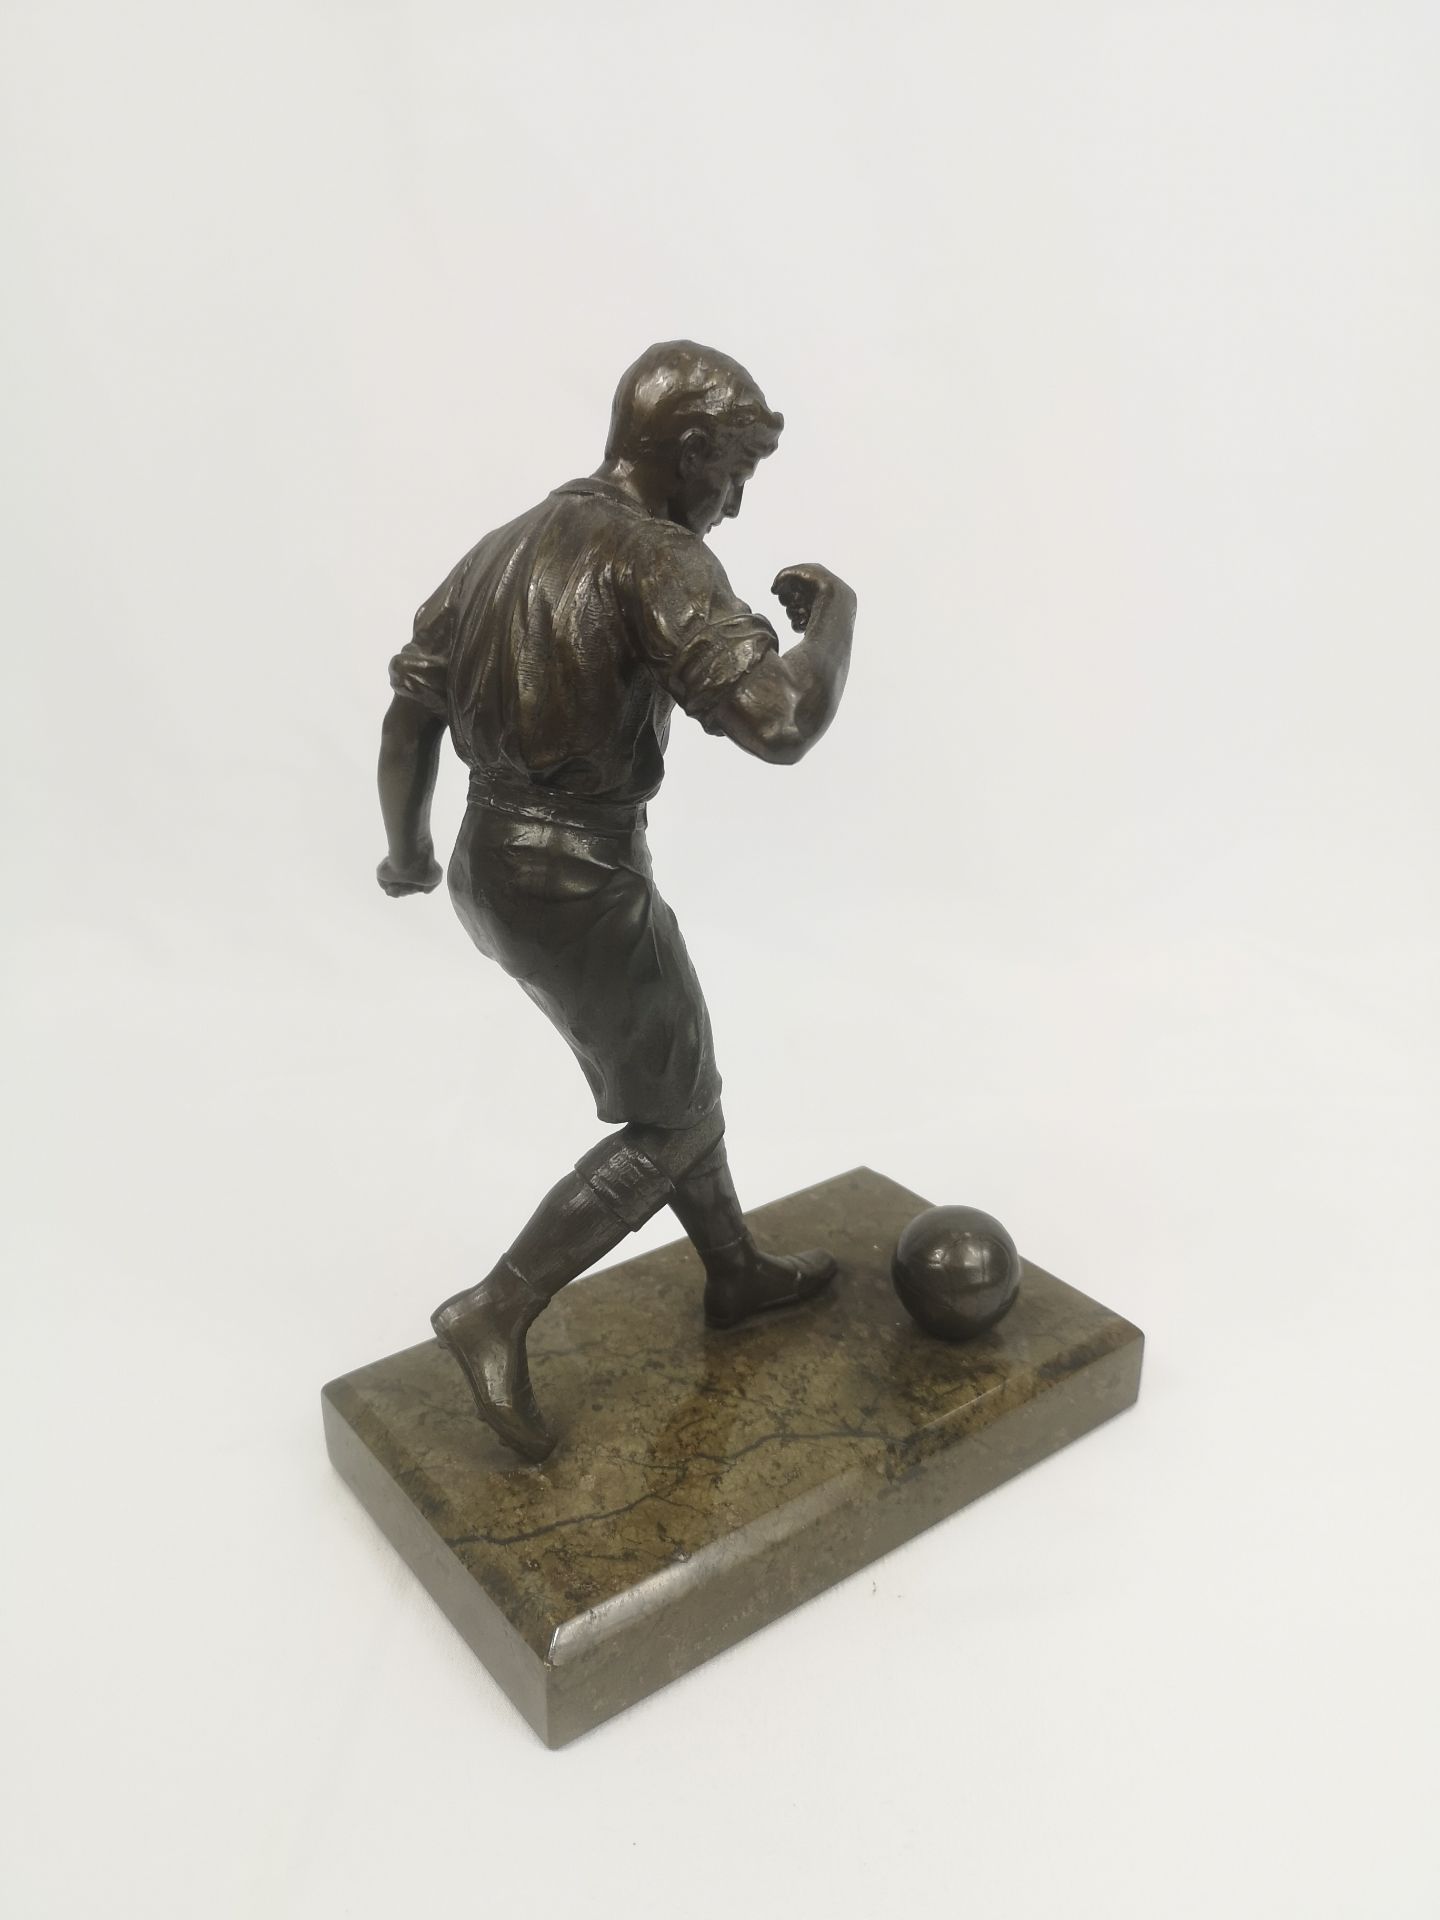 Bronzed figurine of a footballer - Image 4 of 5